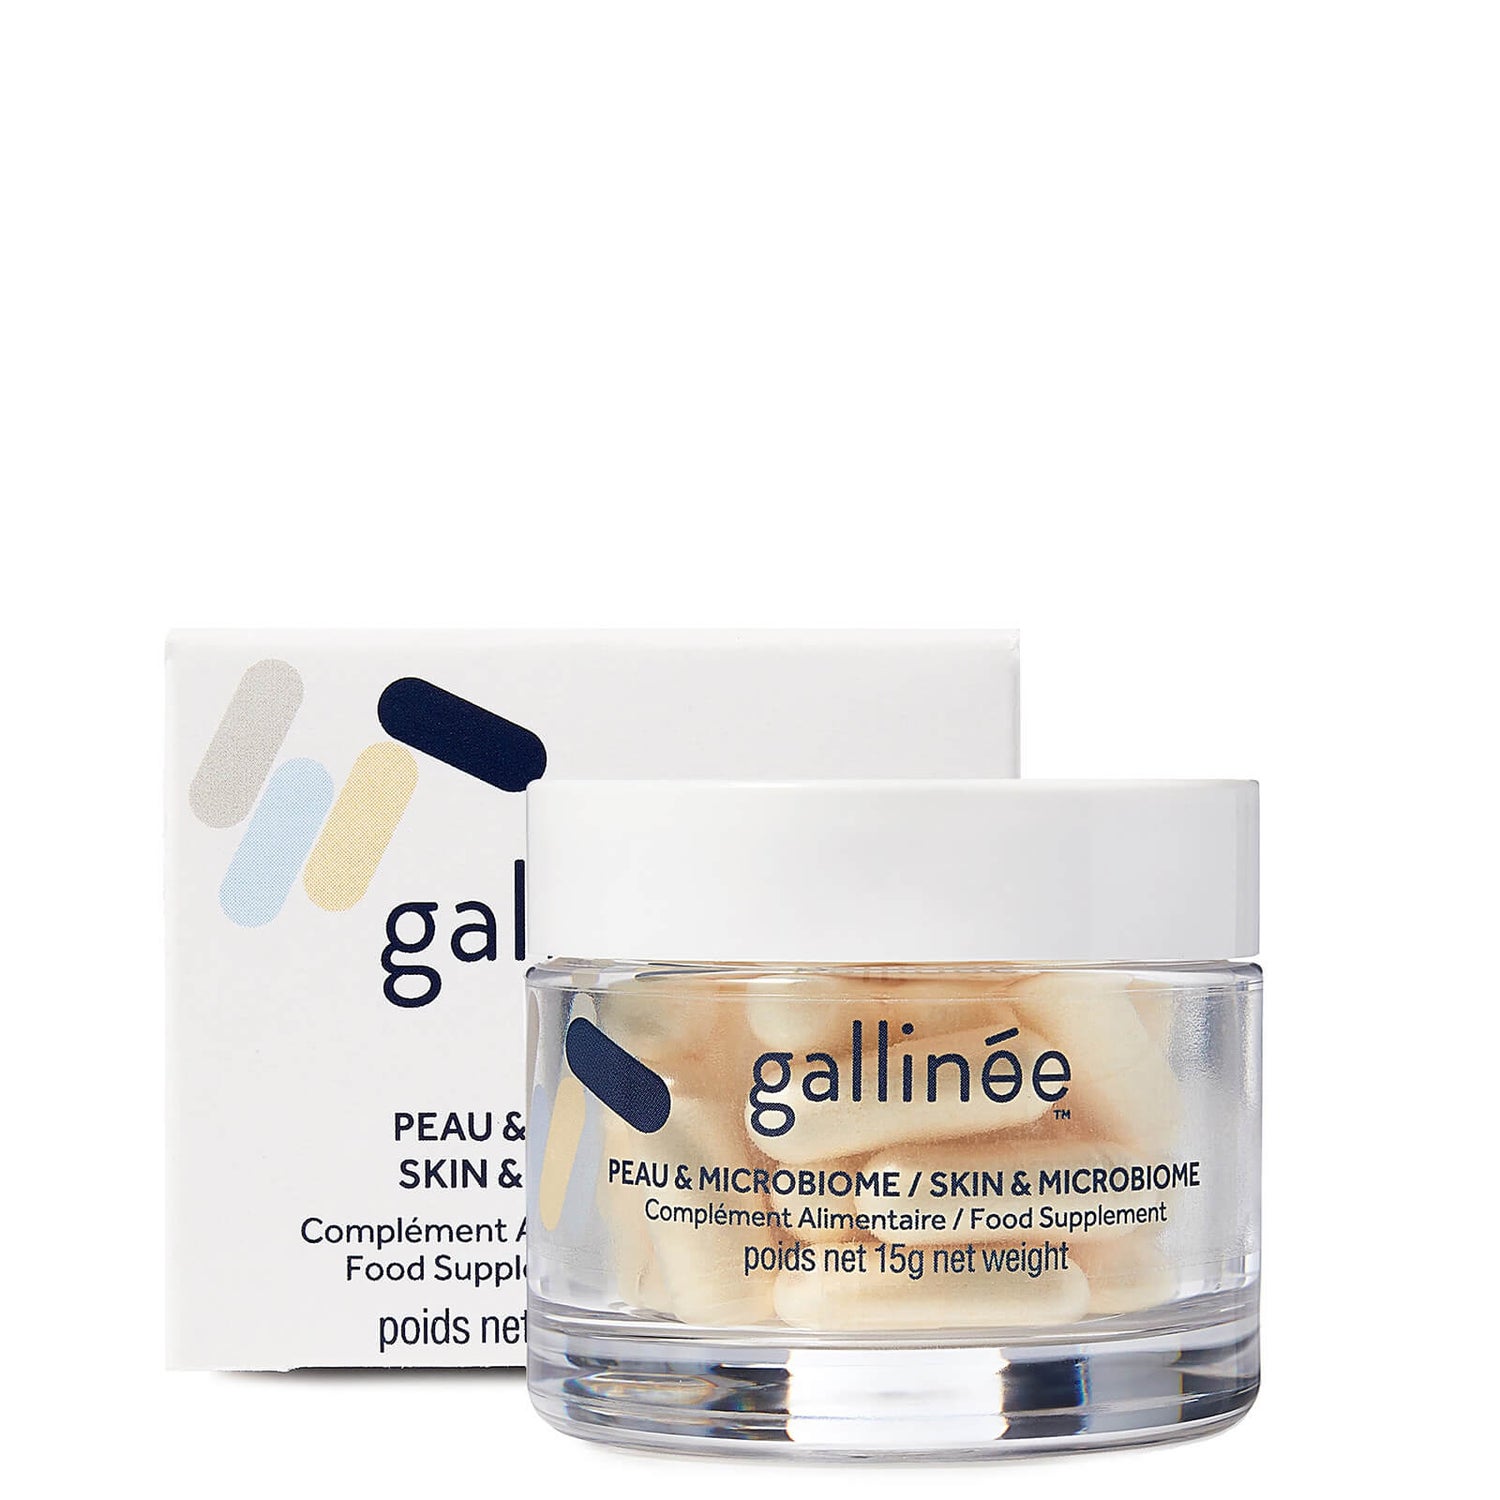 Gallinée Skin and Microbiome Food Supplement: A Month of Pre, Pro and Postbiotics -ravintolisä (30 kapselia) 15 g